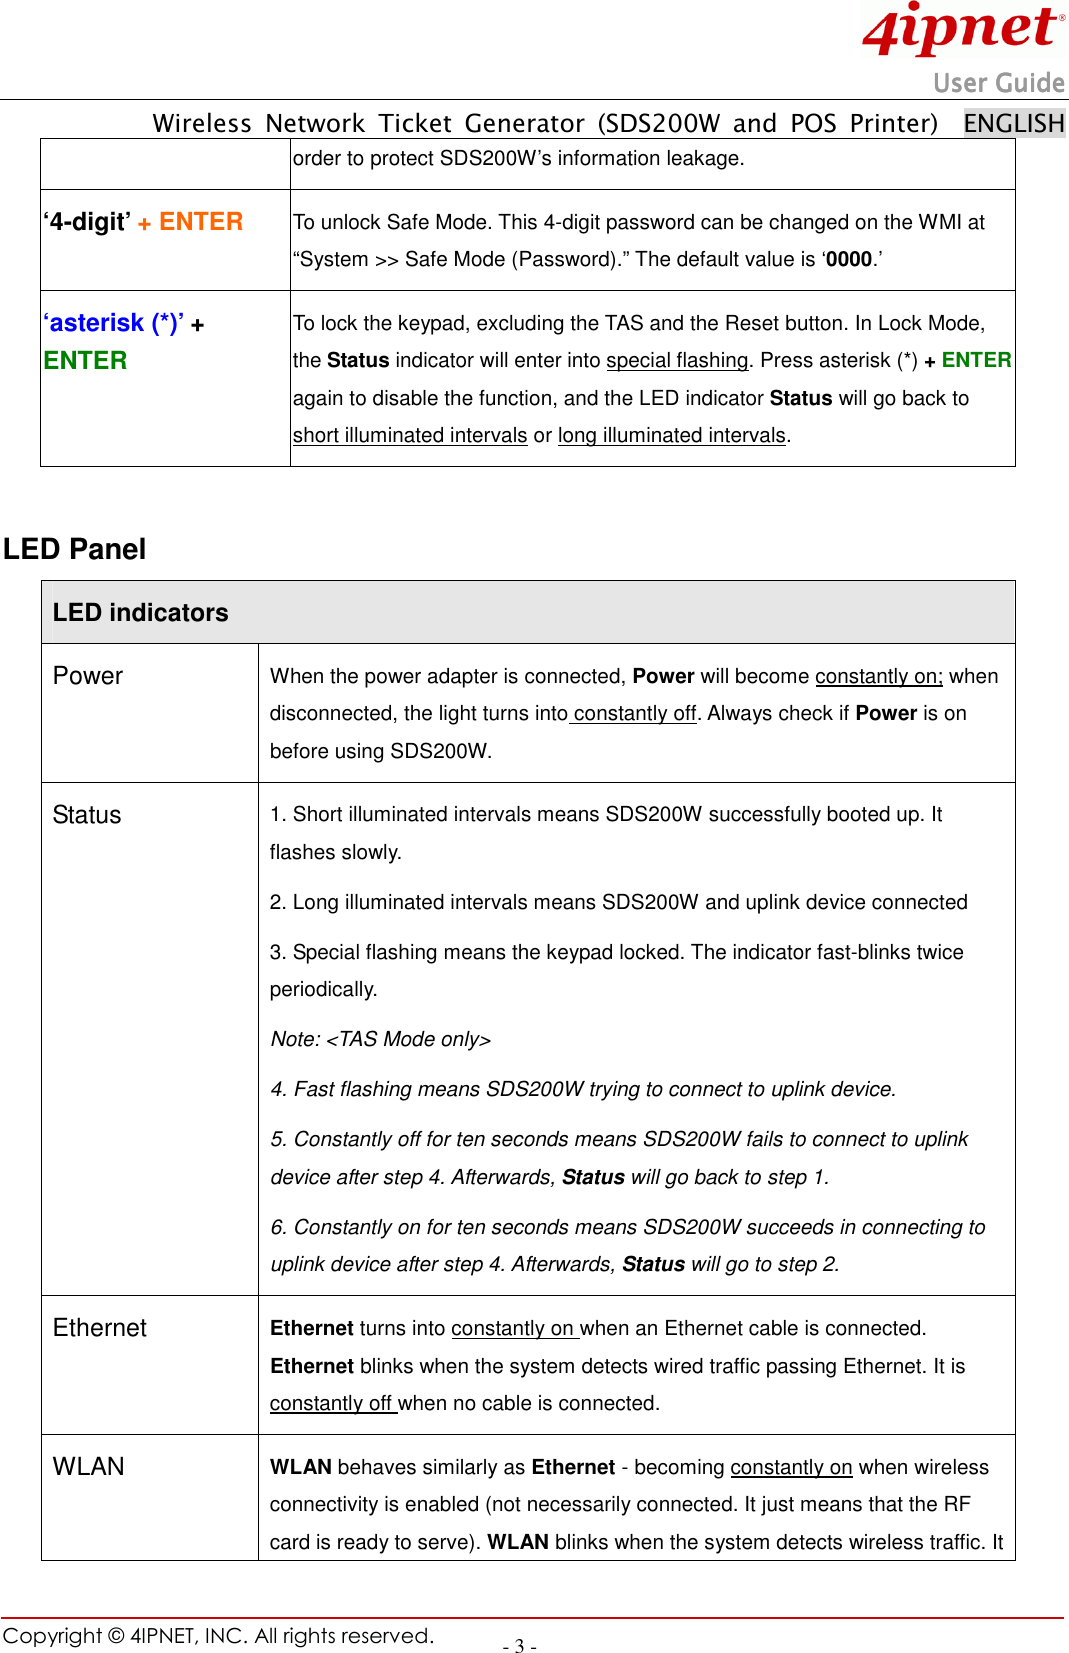                                                                        UserUserUserUser Guide Guide Guide Guide         Wireless  Network  Ticket  Generator  (SDS200W  and  POS  Printer)    ENGLISH Copyright © 4IPNET, INC. All rights reserved.    - 3 - order to protect SDS200W’s information leakage. ‘4-digit’ + ENTER To unlock Safe Mode. This 4-digit password can be changed on the WMI at “System &gt;&gt; Safe Mode (Password).” The default value is ‘0000.’   ‘asterisk (*)’ + ENTER   To lock the keypad, excluding the TAS and the Reset button. In Lock Mode, the Status indicator will enter into special flashing. Press asterisk (*) + ENTER again to disable the function, and the LED indicator Status will go back to short illuminated intervals or long illuminated intervals.          LED Panel LED indicators Power When the power adapter is connected, Power will become constantly on; when disconnected, the light turns into constantly off. Always check if Power is on before using SDS200W. Status 1. Short illuminated intervals means SDS200W successfully booted up. It flashes slowly.     2. Long illuminated intervals means SDS200W and uplink device connected 3. Special flashing means the keypad locked. The indicator fast-blinks twice periodically. Note: &lt;TAS Mode only&gt; 4. Fast flashing means SDS200W trying to connect to uplink device. 5. Constantly off for ten seconds means SDS200W fails to connect to uplink device after step 4. Afterwards, Status will go back to step 1.   6. Constantly on for ten seconds means SDS200W succeeds in connecting to uplink device after step 4. Afterwards, Status will go to step 2.       Ethernet Ethernet turns into constantly on when an Ethernet cable is connected. Ethernet blinks when the system detects wired traffic passing Ethernet. It is constantly off when no cable is connected.   WLAN WLAN behaves similarly as Ethernet - becoming constantly on when wireless connectivity is enabled (not necessarily connected. It just means that the RF card is ready to serve). WLAN blinks when the system detects wireless traffic. It 